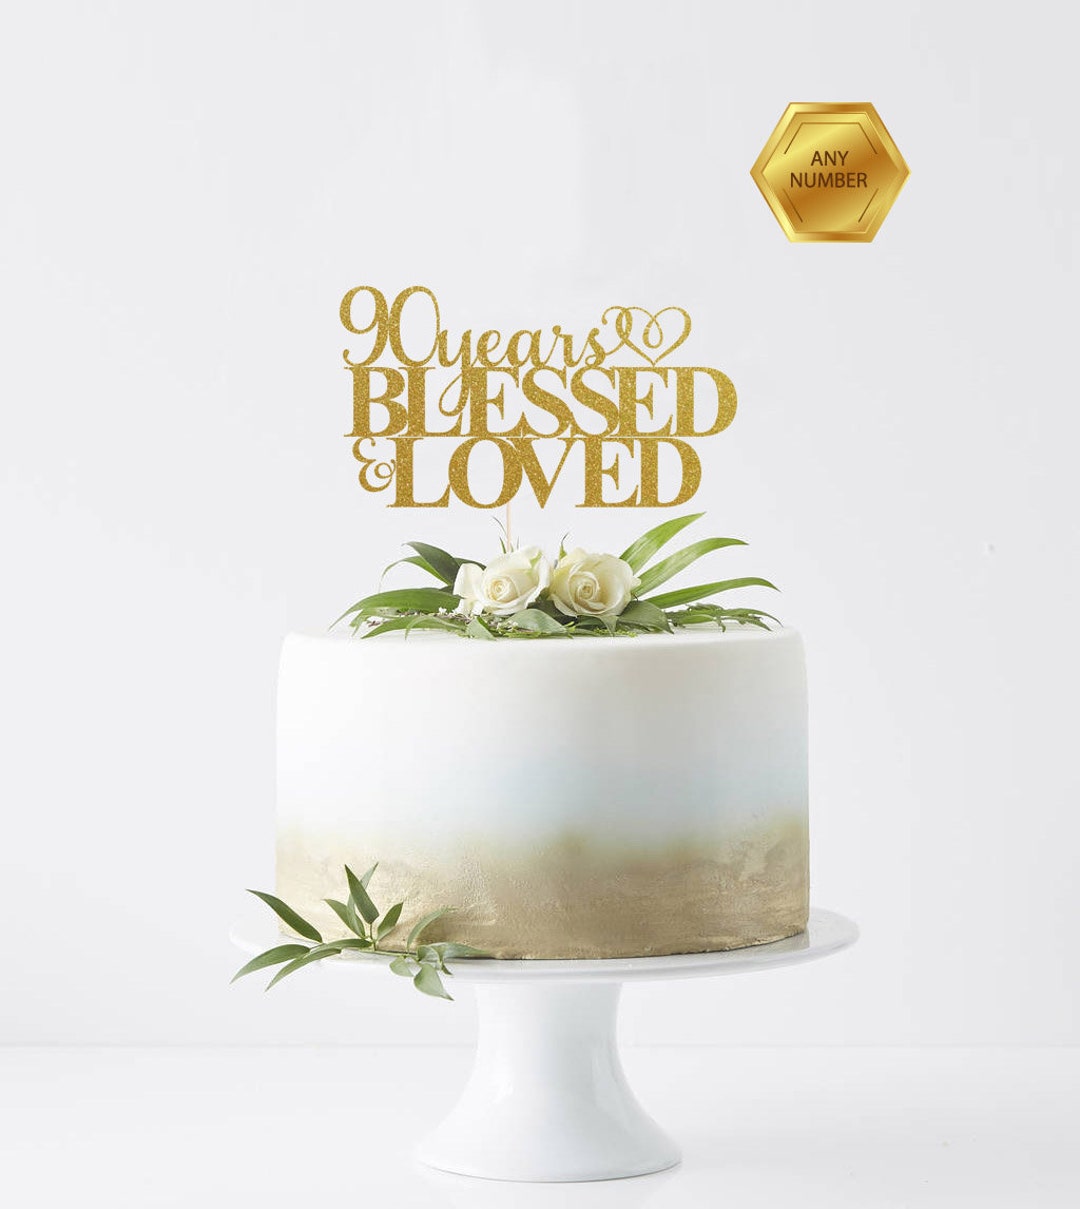 90 Years Blessed & Loved 90th Birthday Cake Topper Happy - Etsy